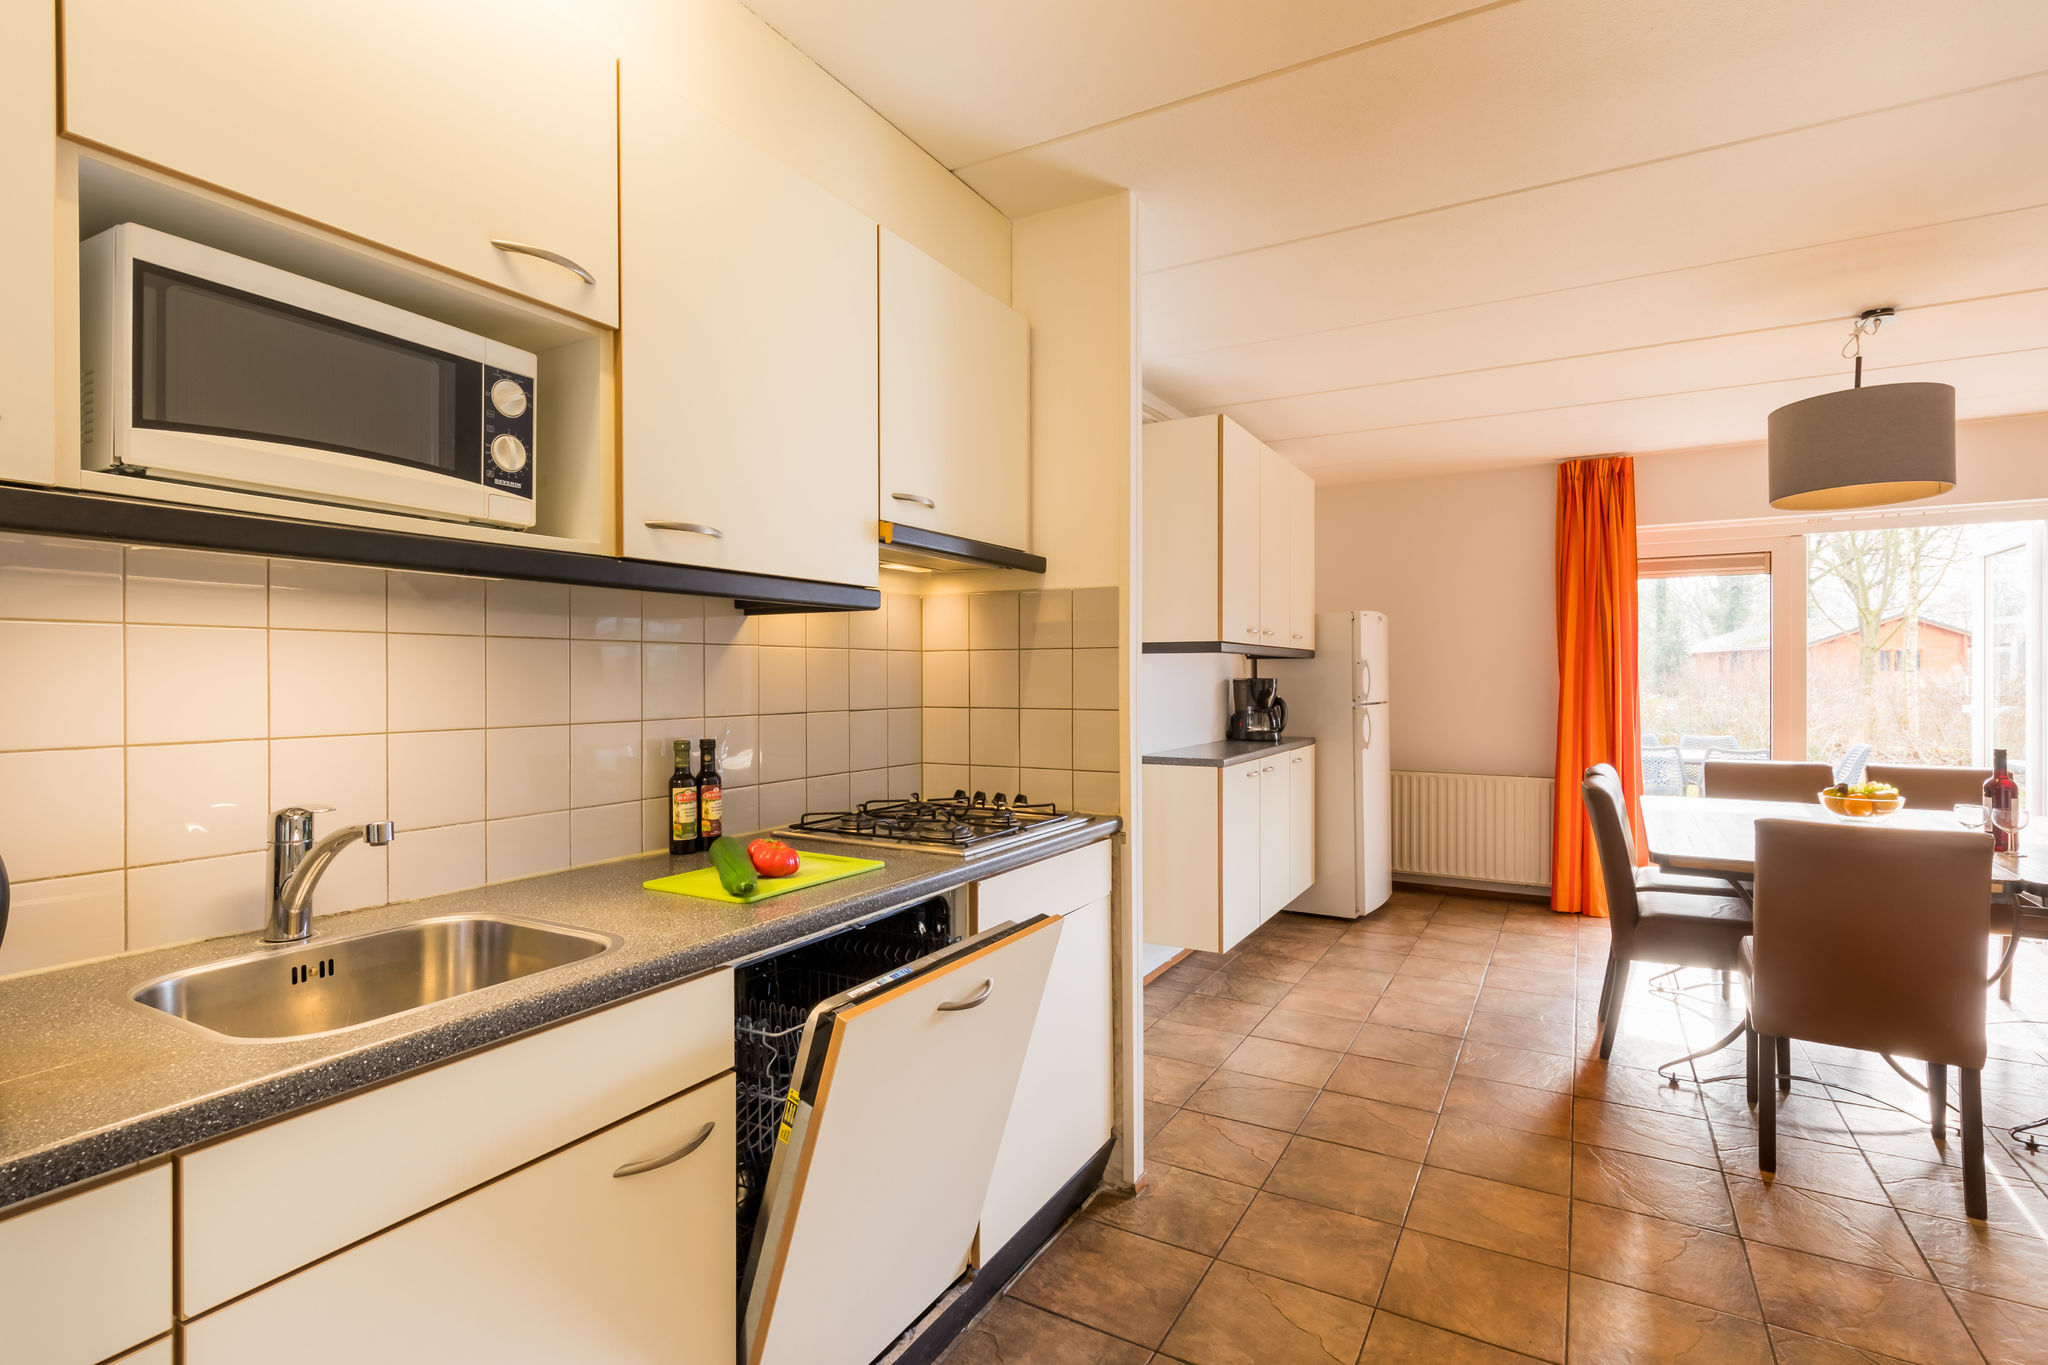 Spacious bungalow with dishwasher, near the Hunebedcentrum